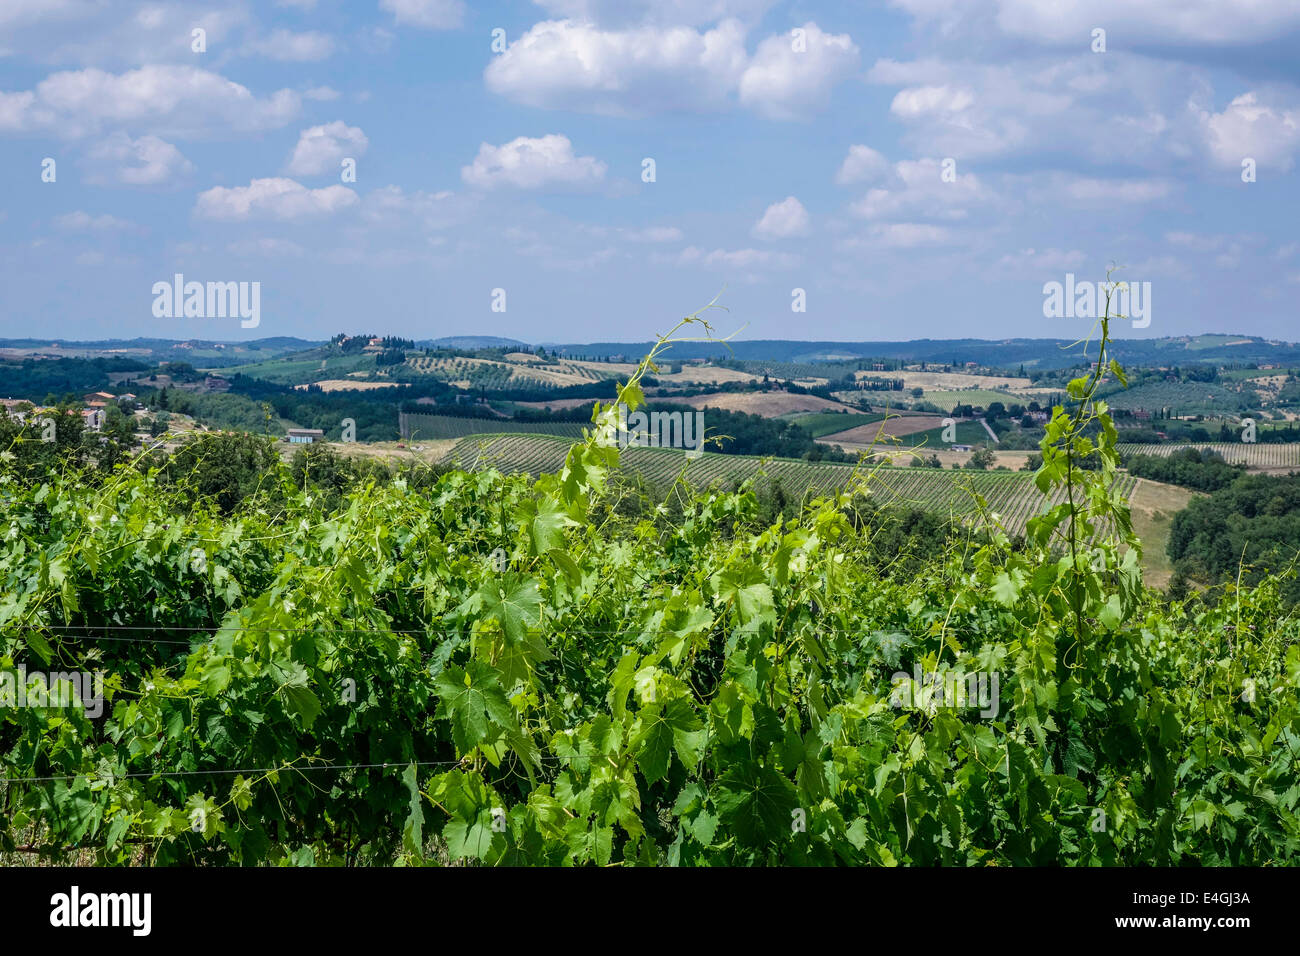 Typical landscape with vineyards in Tuscany, Italy, Europe Stock Photo